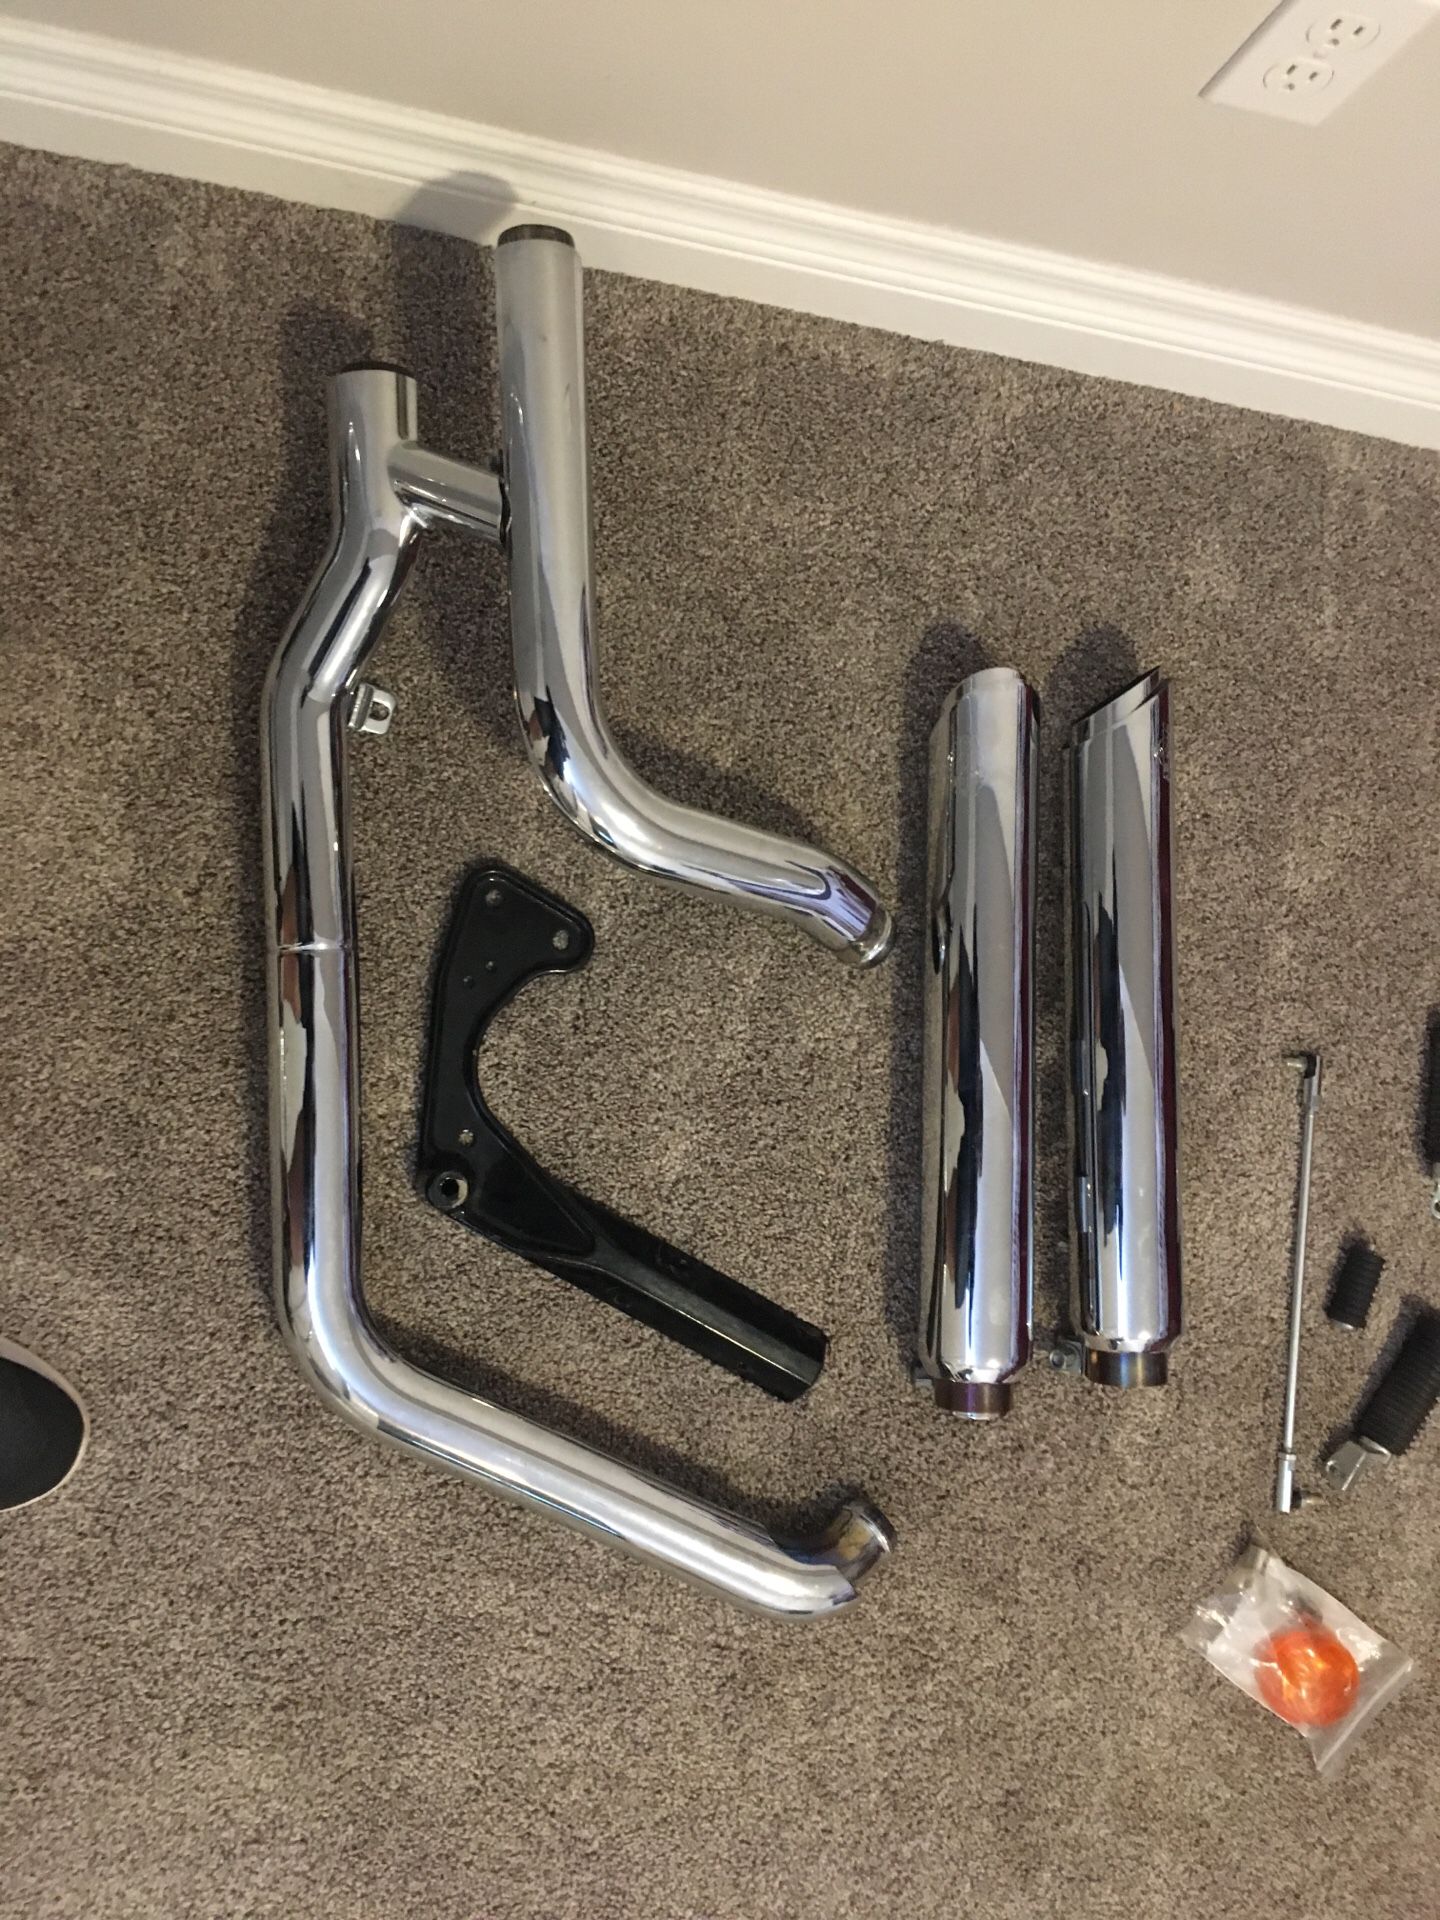 Harley Davidson exhaust with Vance and Hines mufflers